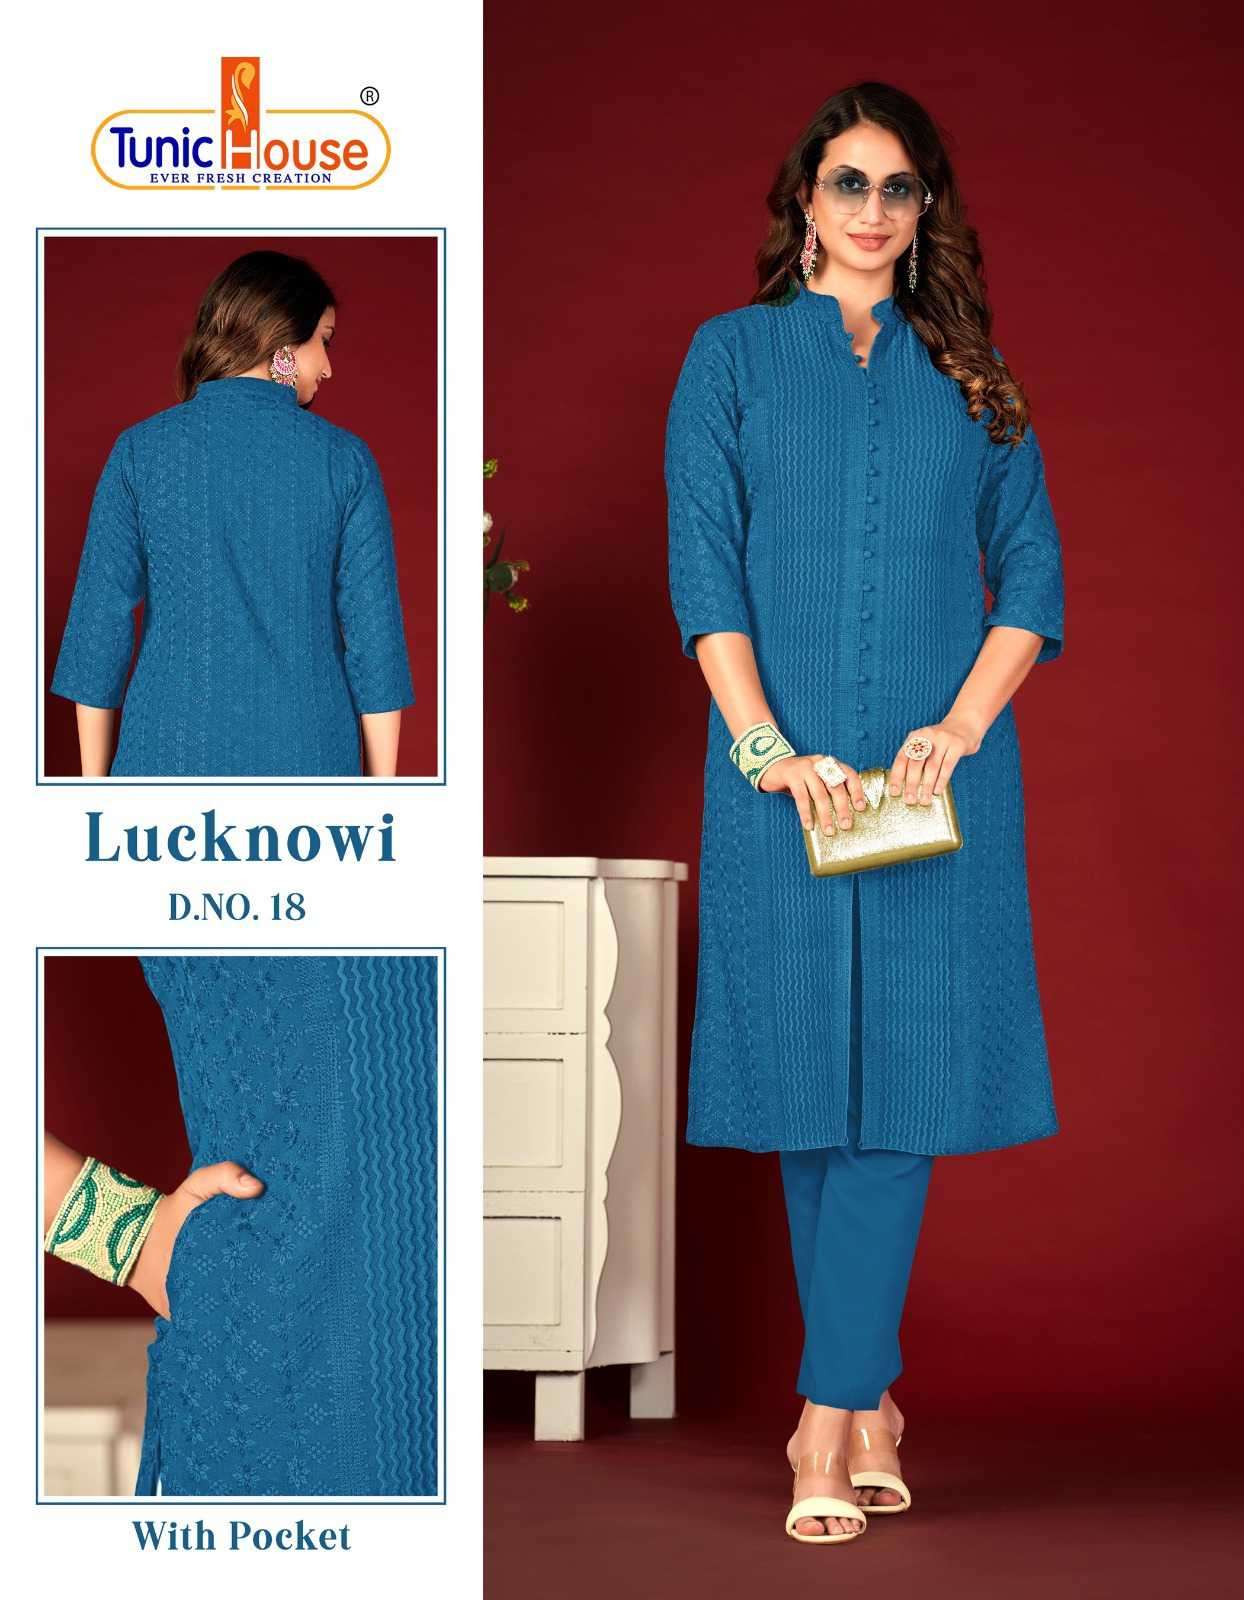 Tunic House Lucknowi Lining New Colors Chikan Work Straight Kurti New Designs